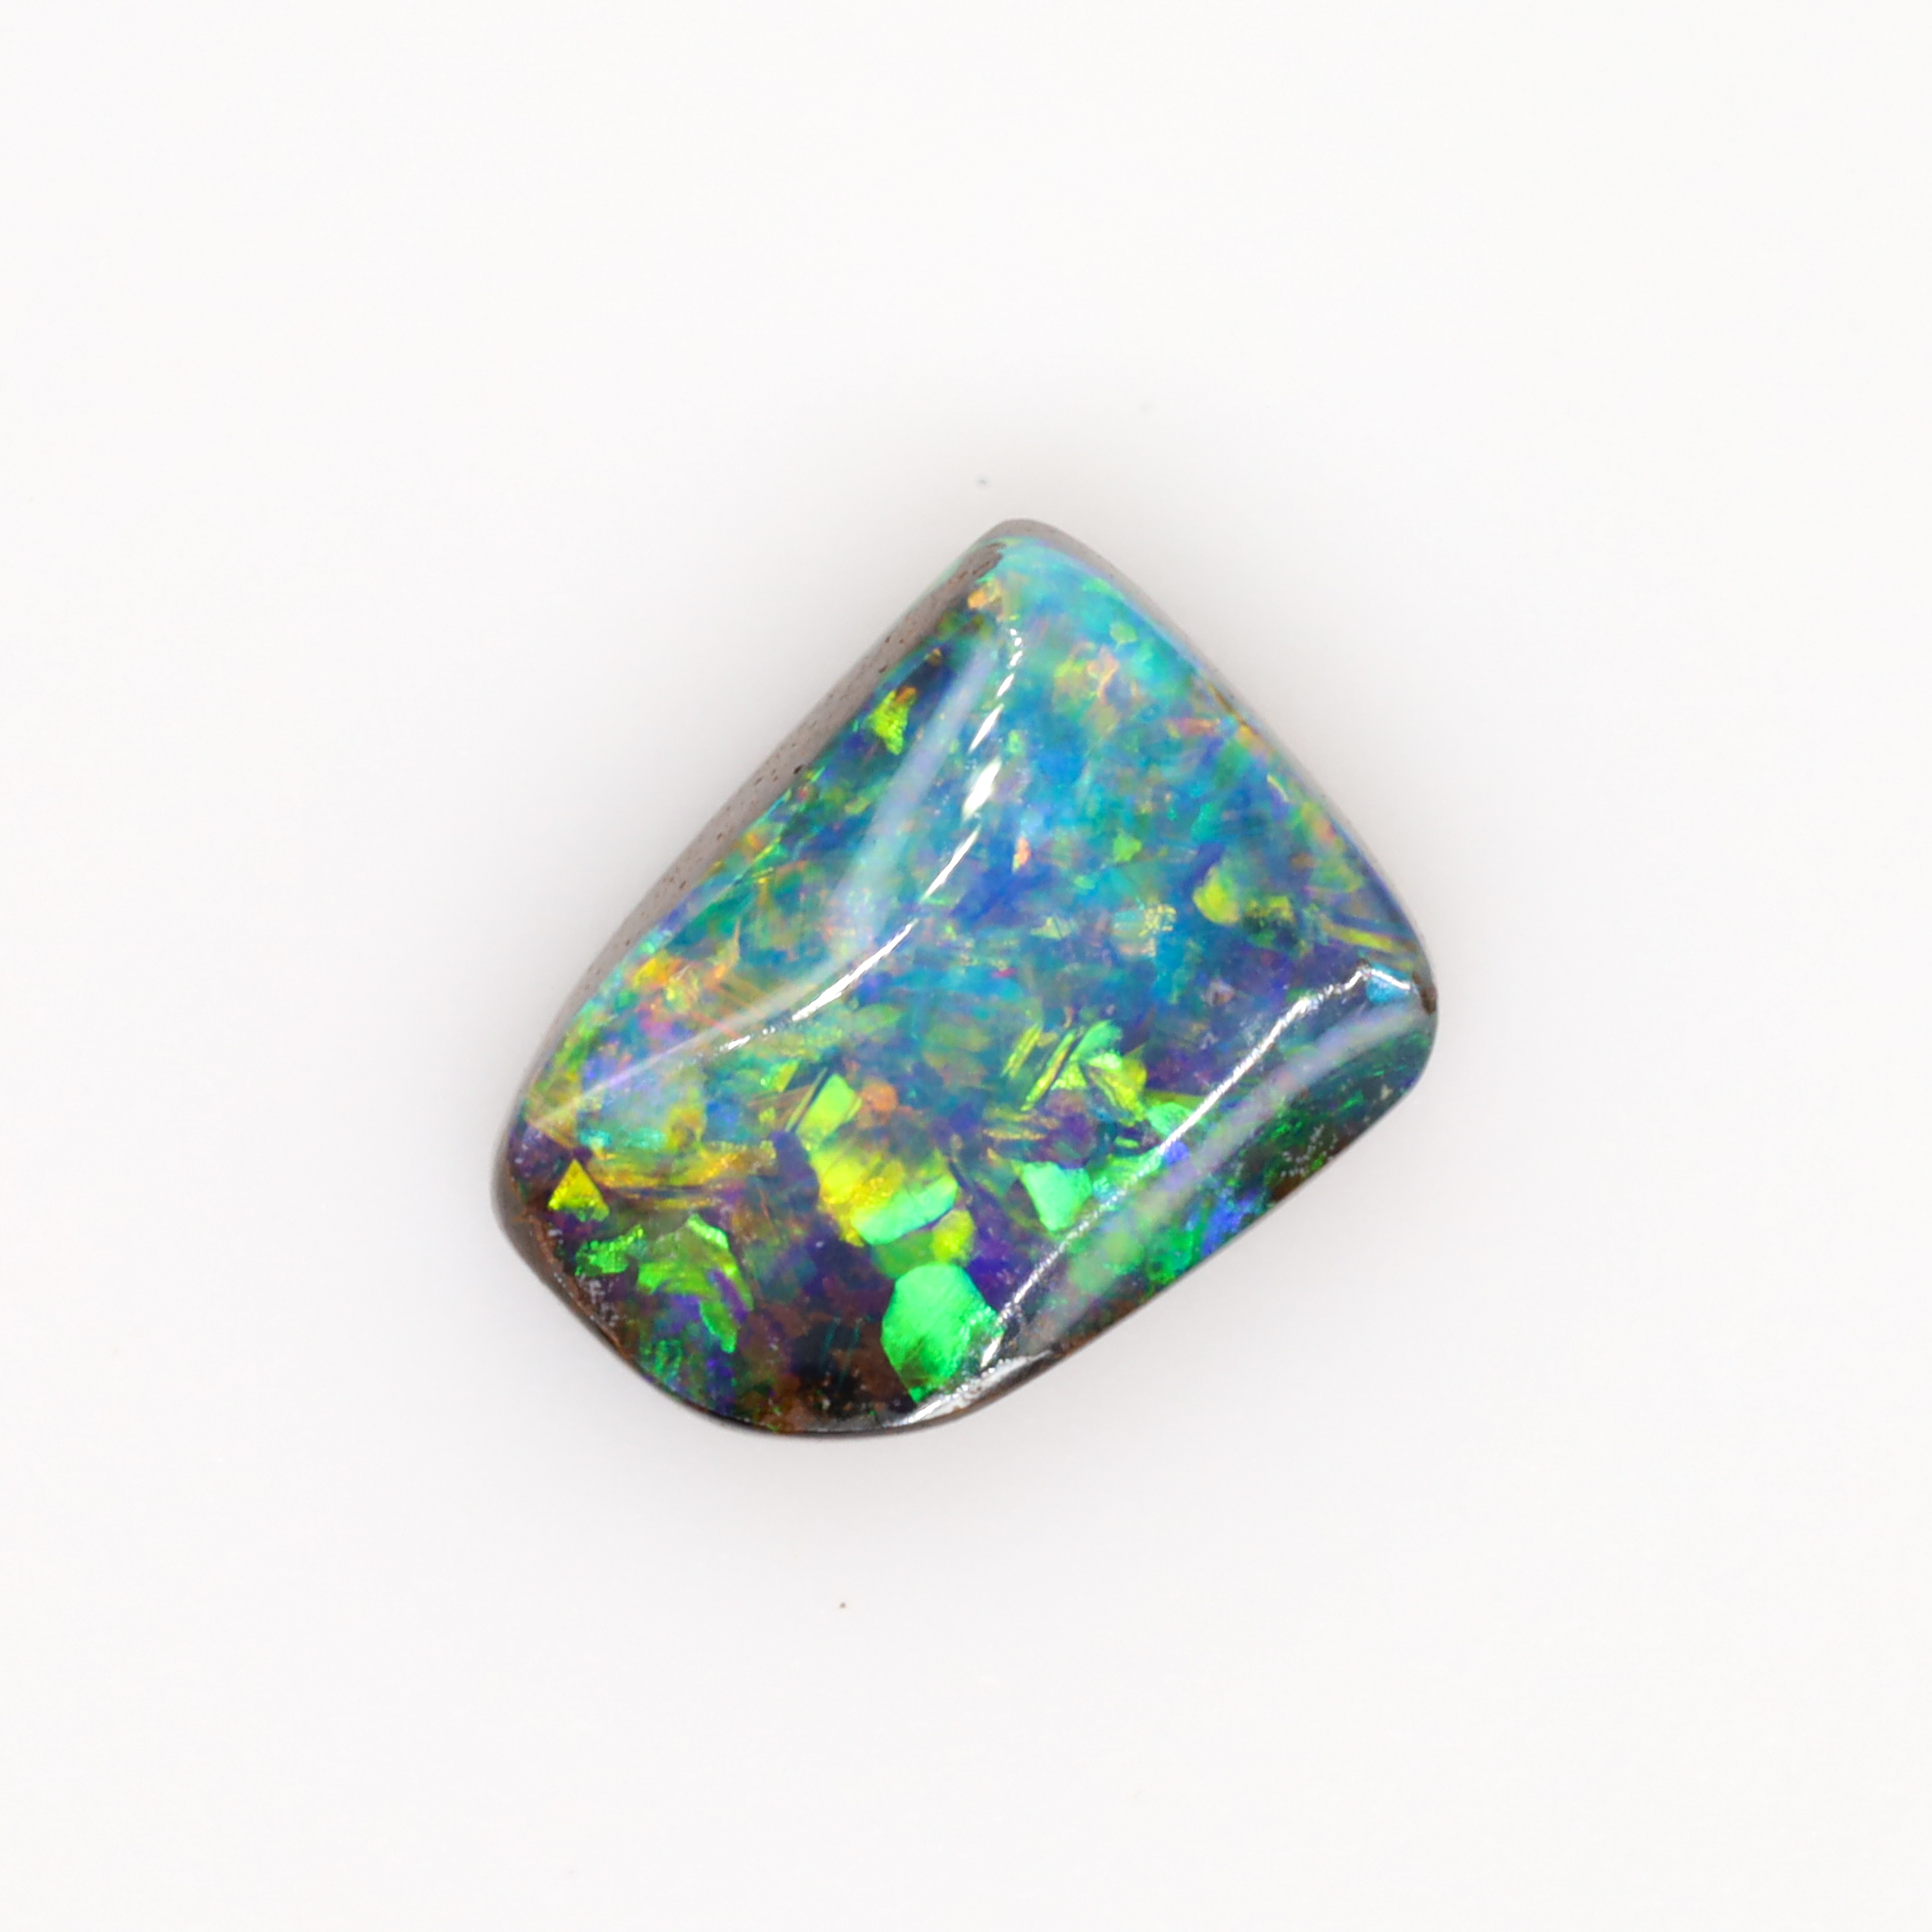 Blue, Green, Pink and Purple Solid Unset Boulder Opal